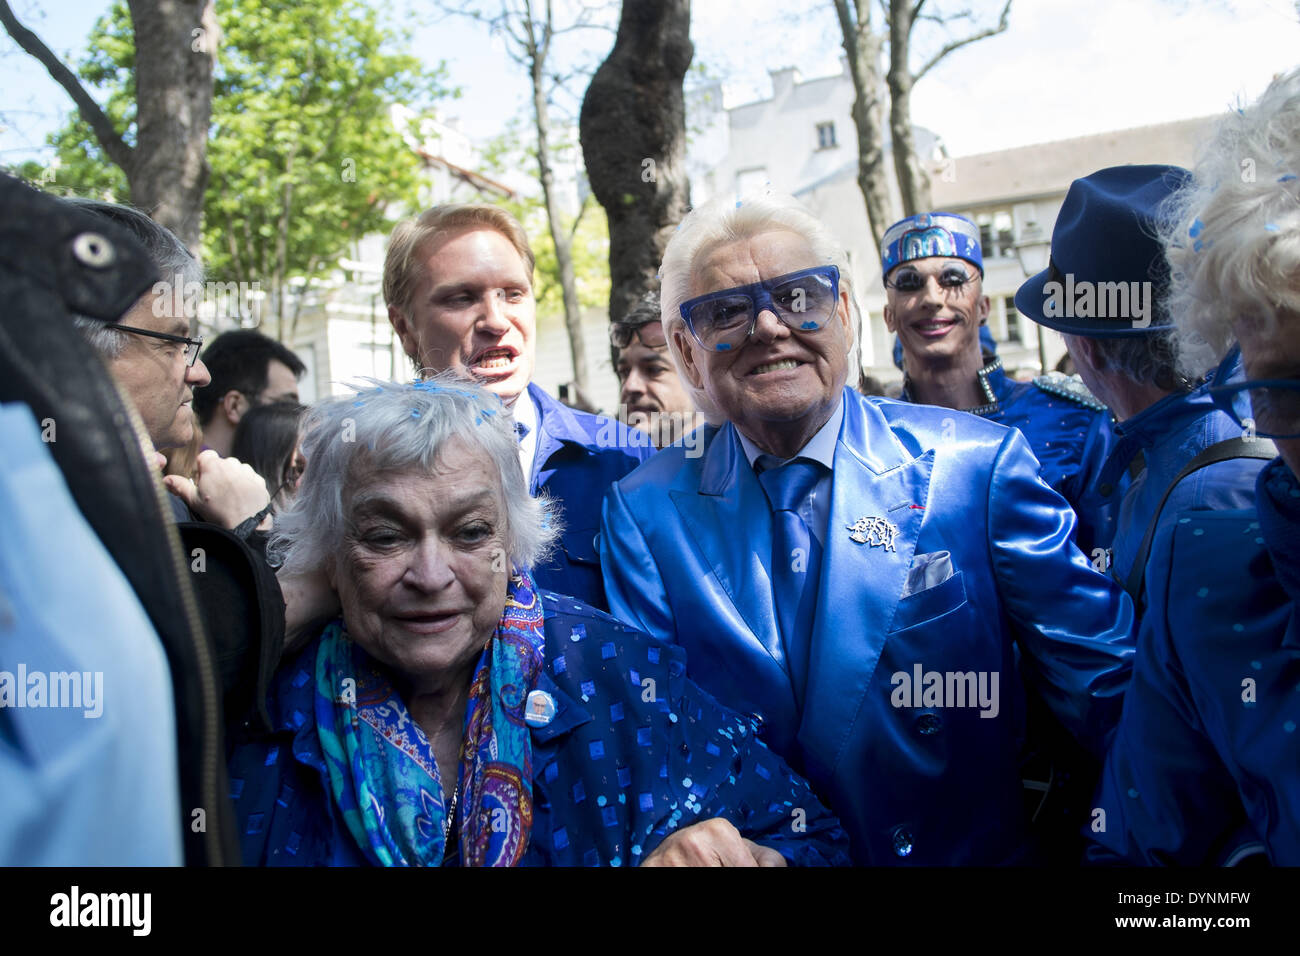 Paris, France. 19th Apr, 2014. French cabaret director, Michel Georges Alfred Catty a.k.a Michou arrival in the Michou Day flashMob in Paris, with a blue dresscode, on April 19, 2014. Around 200 people gathered, dressed in blue to throw up confetti, in Jehan Rictus Square in Montmartre, Paris. (Photo by Michael Bunel/NurPhoto) © Michael Bunel/NurPhoto/ZUMAPRESS.com/Alamy Live News Stock Photo